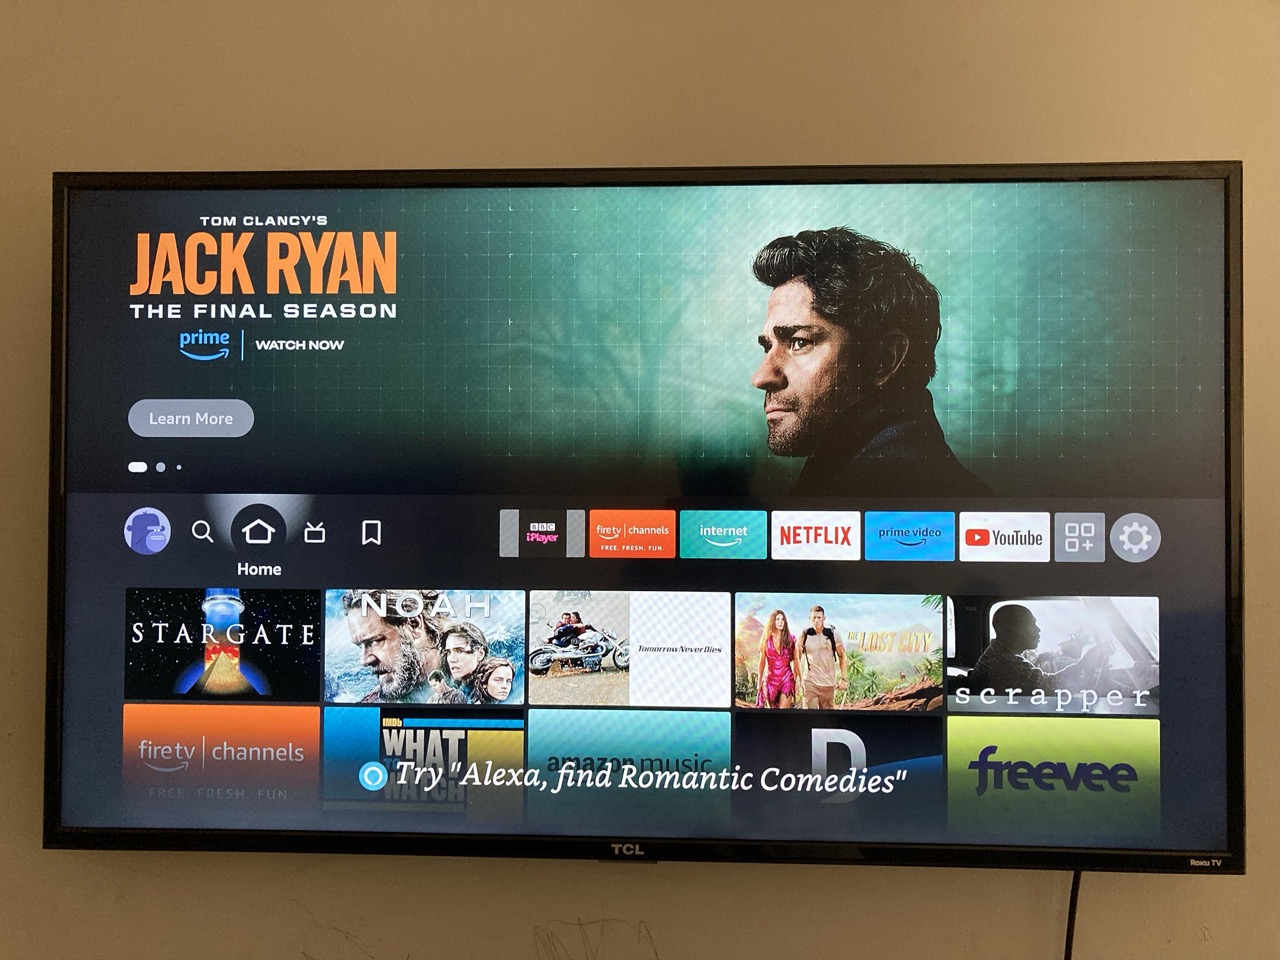 All-new  Fire TV Stick 4K streaming device, more than 1.5 million  movies and TV episodes, supports Wi-Fi 6, watch free & live TV